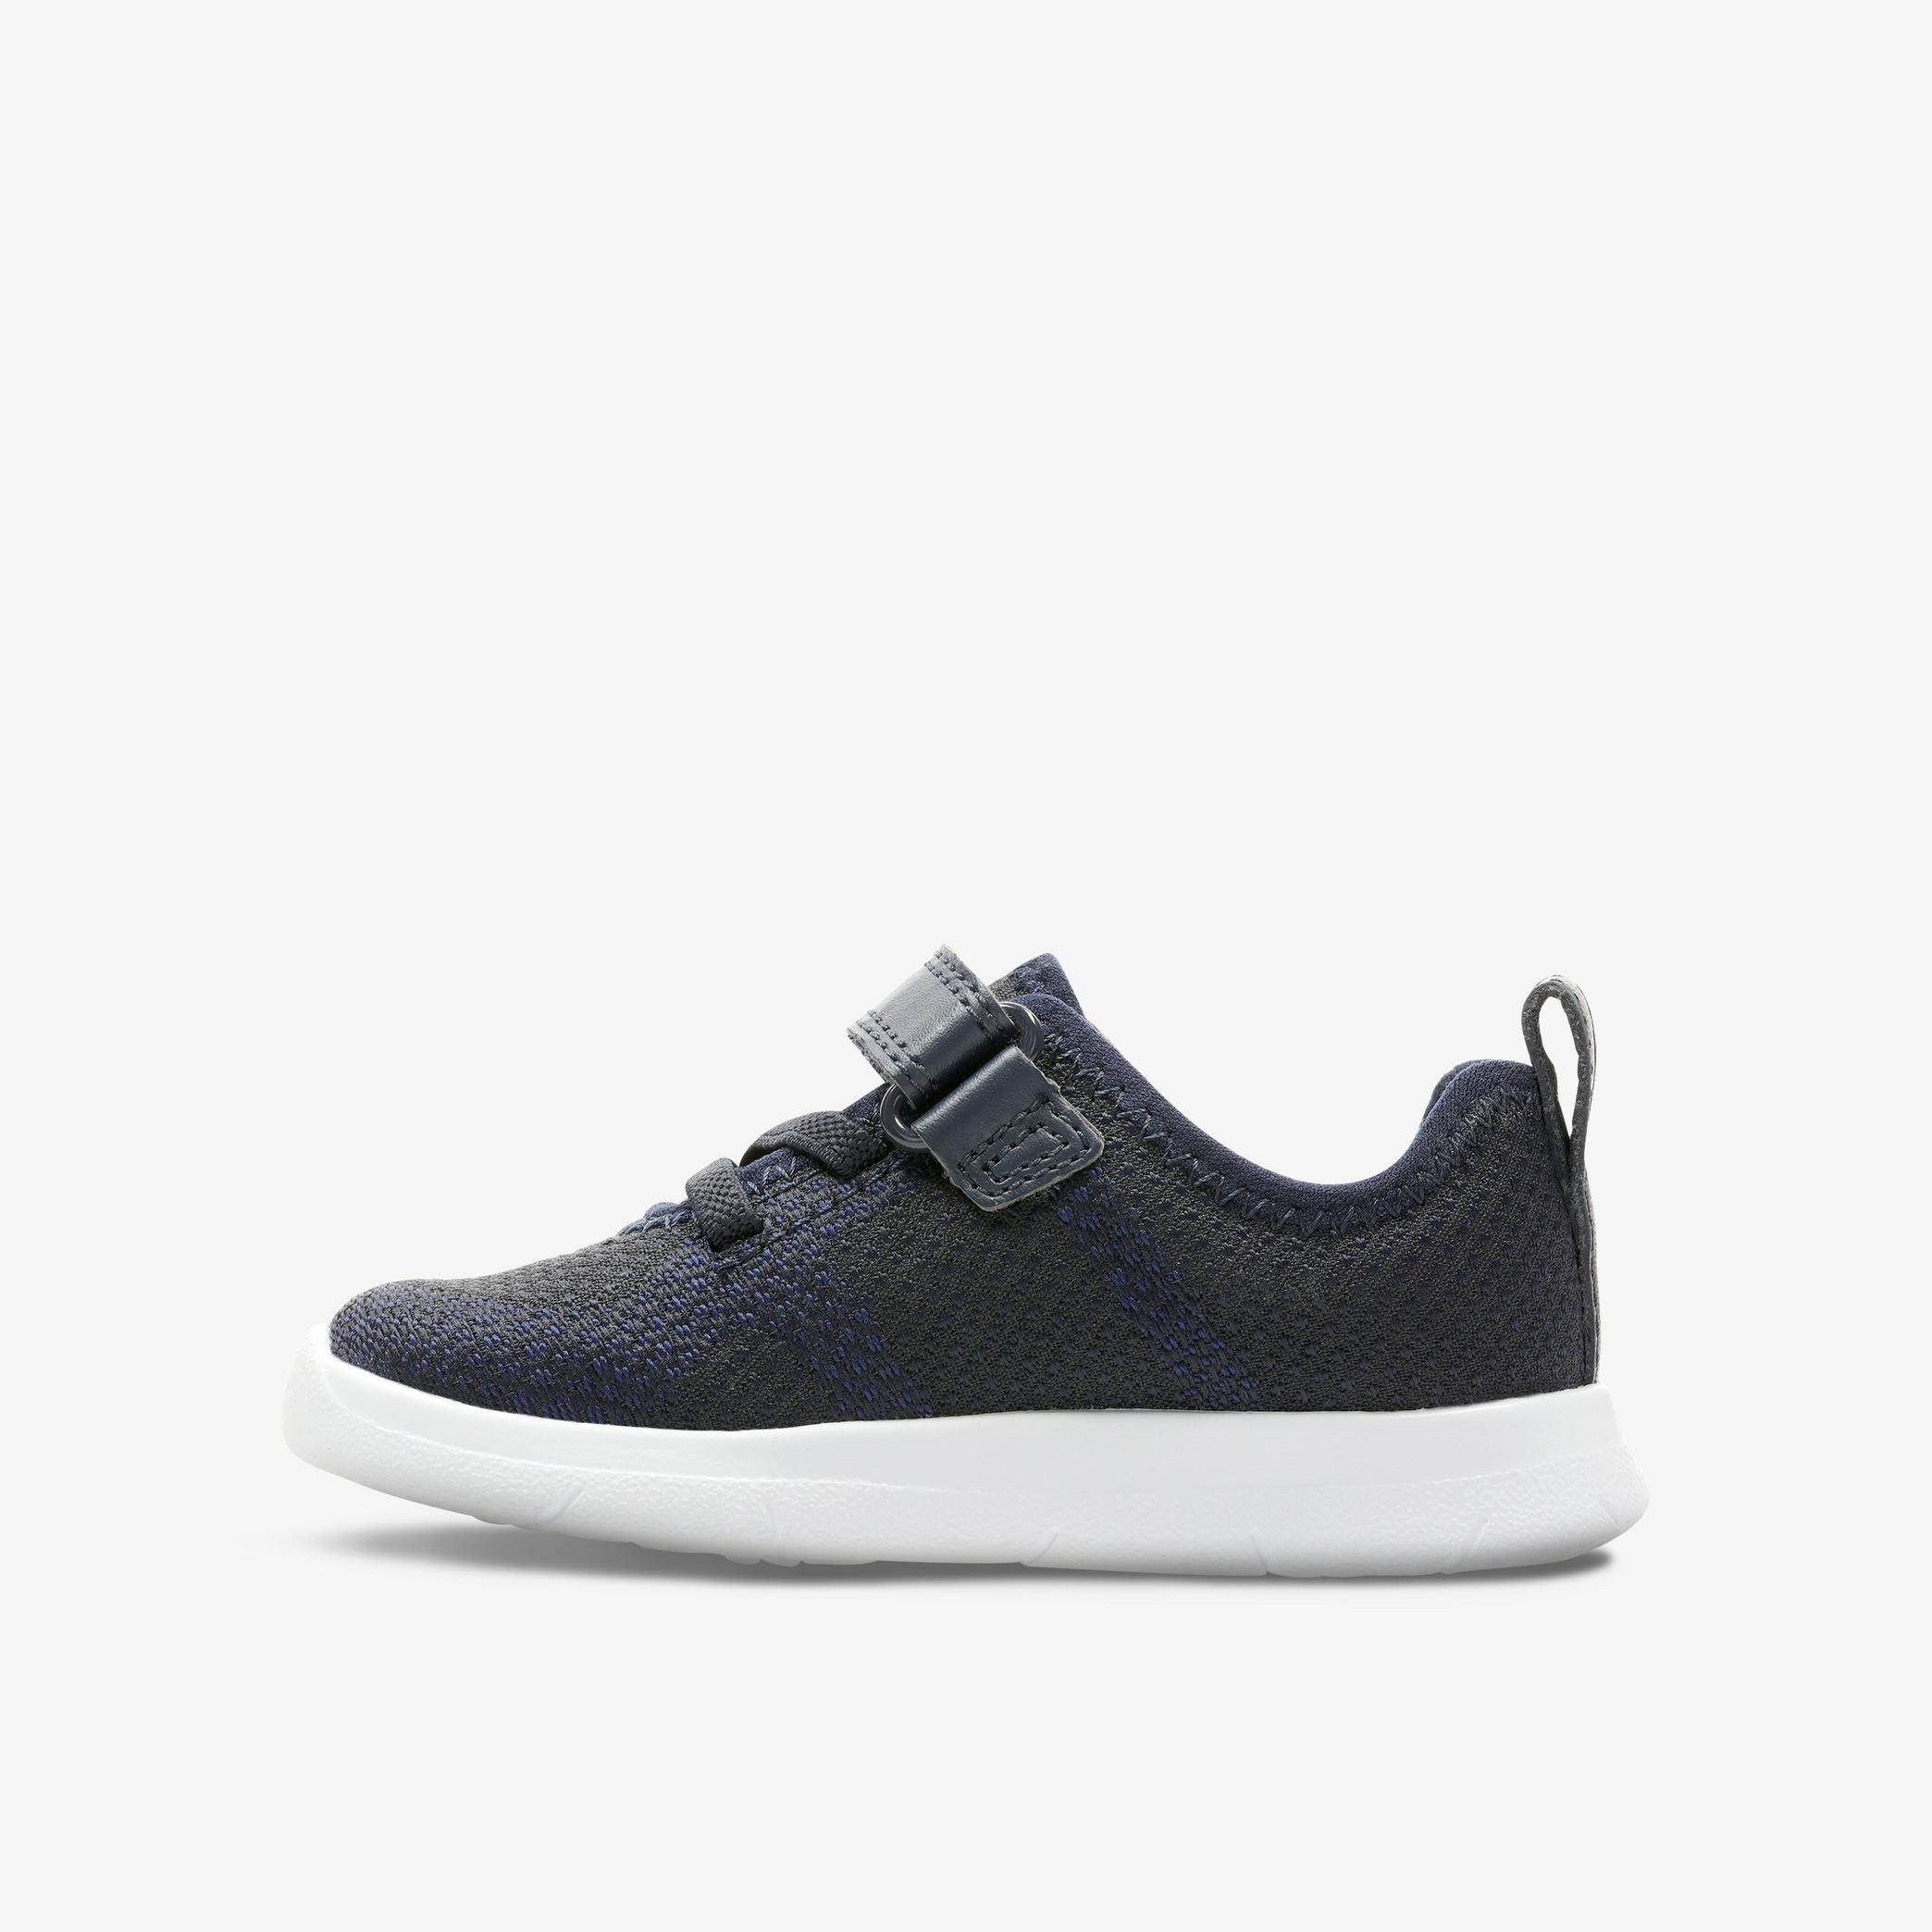 Ath Flux Toddler Navy Trainers, view 2 of 6